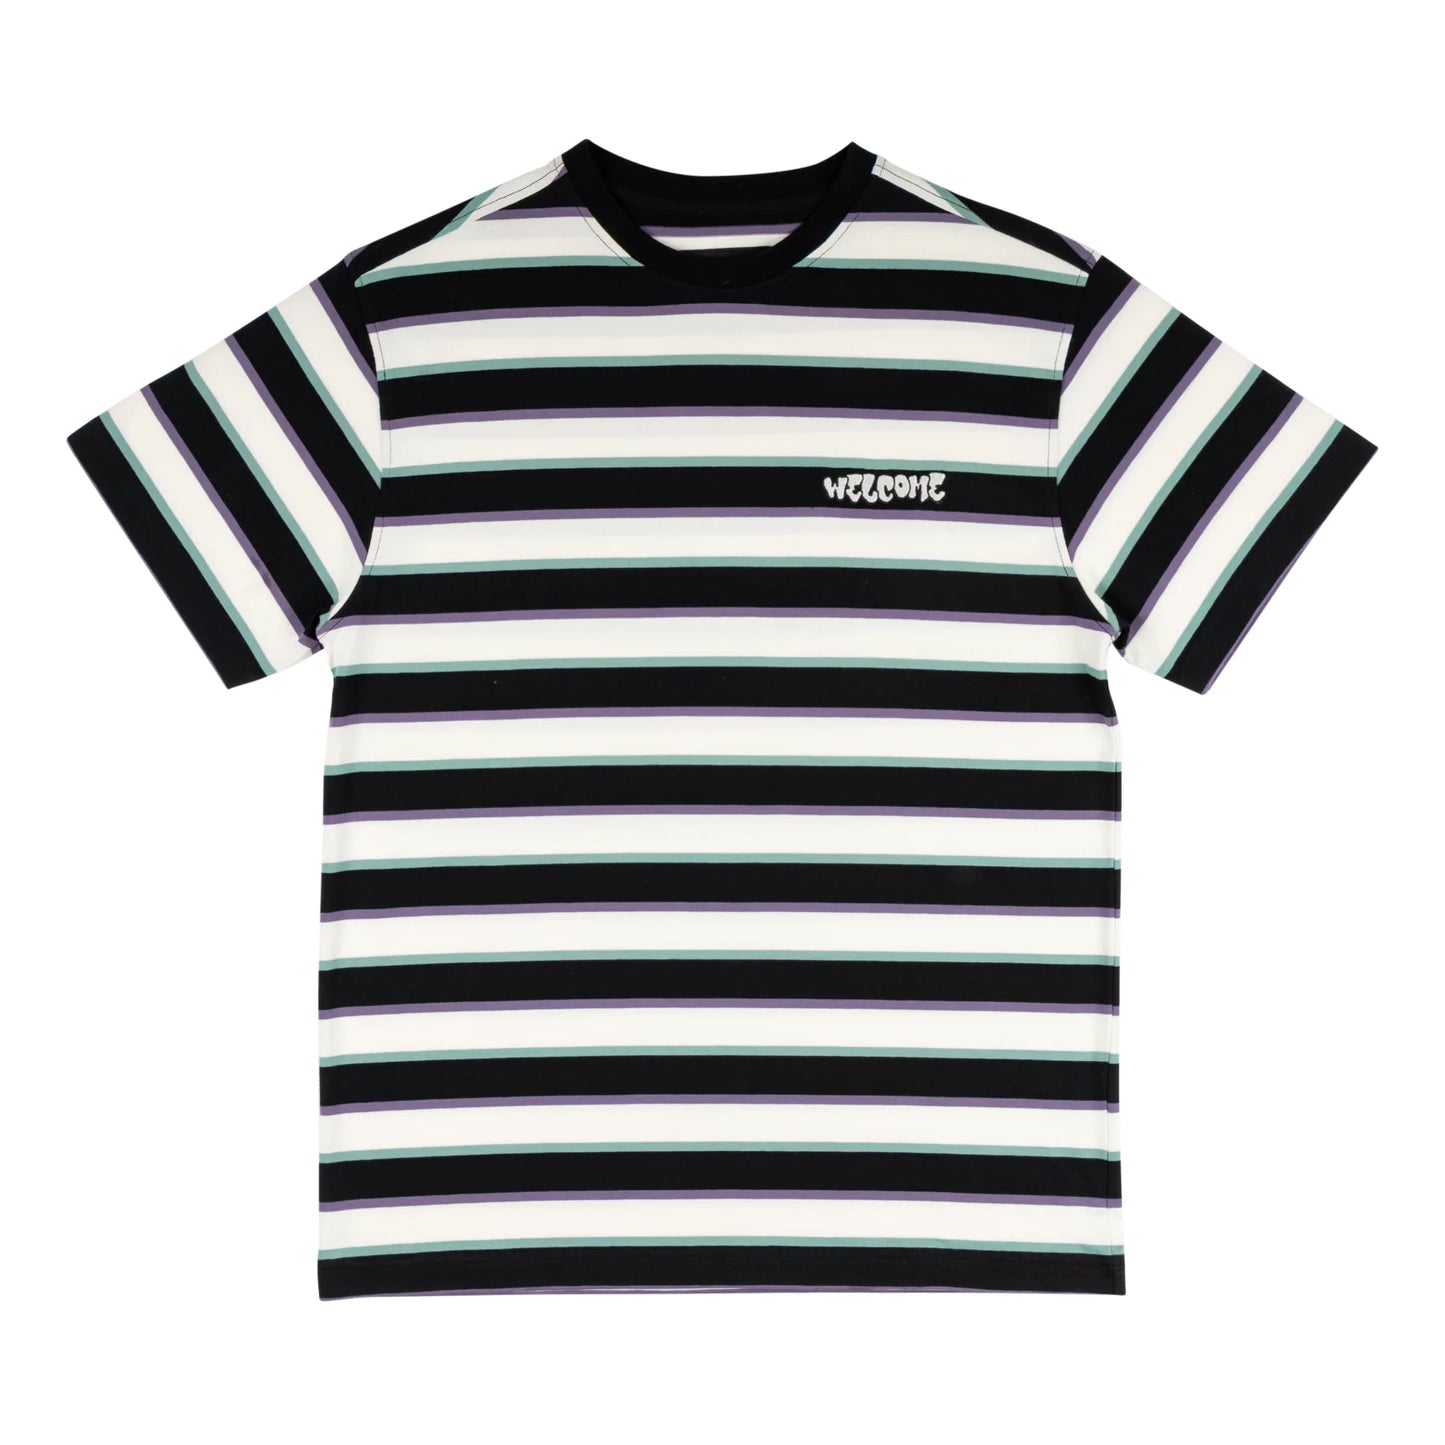 Welcome - Cooper Striped Yarn-Dyed S/S Knit